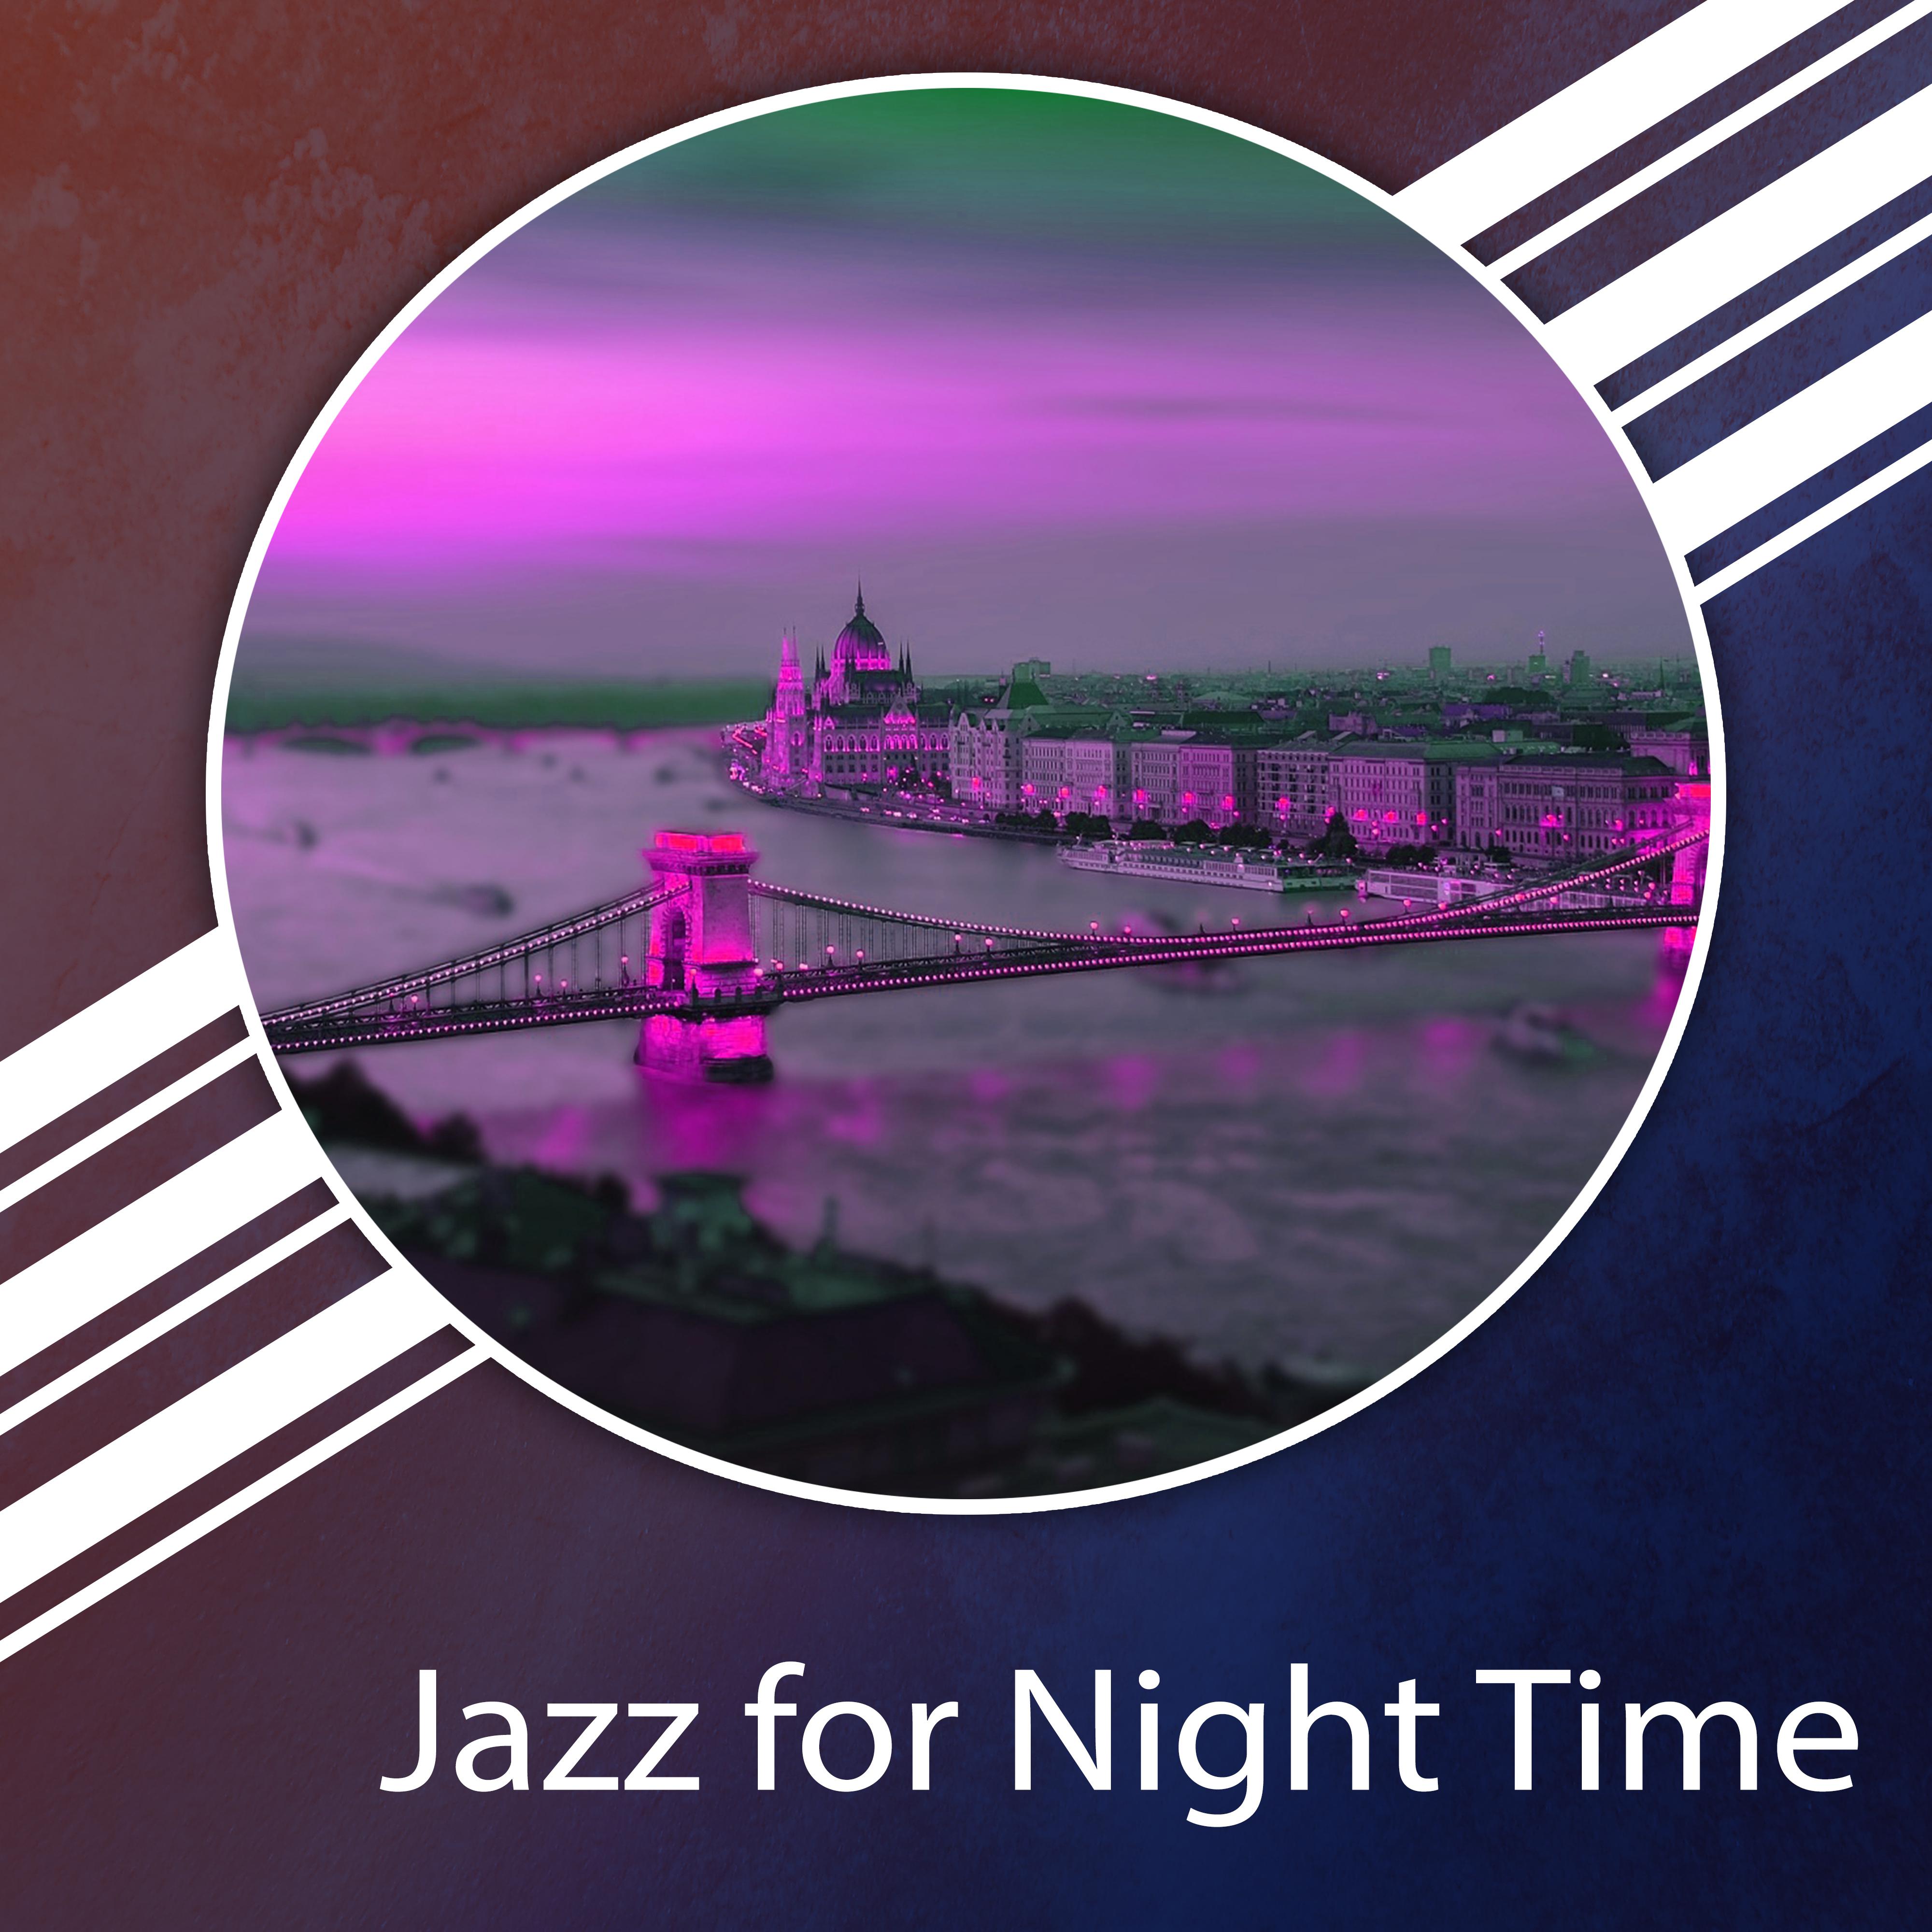 Jazz for Night Time  Shades of Jazz, Relaxing Time, Night Jazz Bar, Smooth Piano